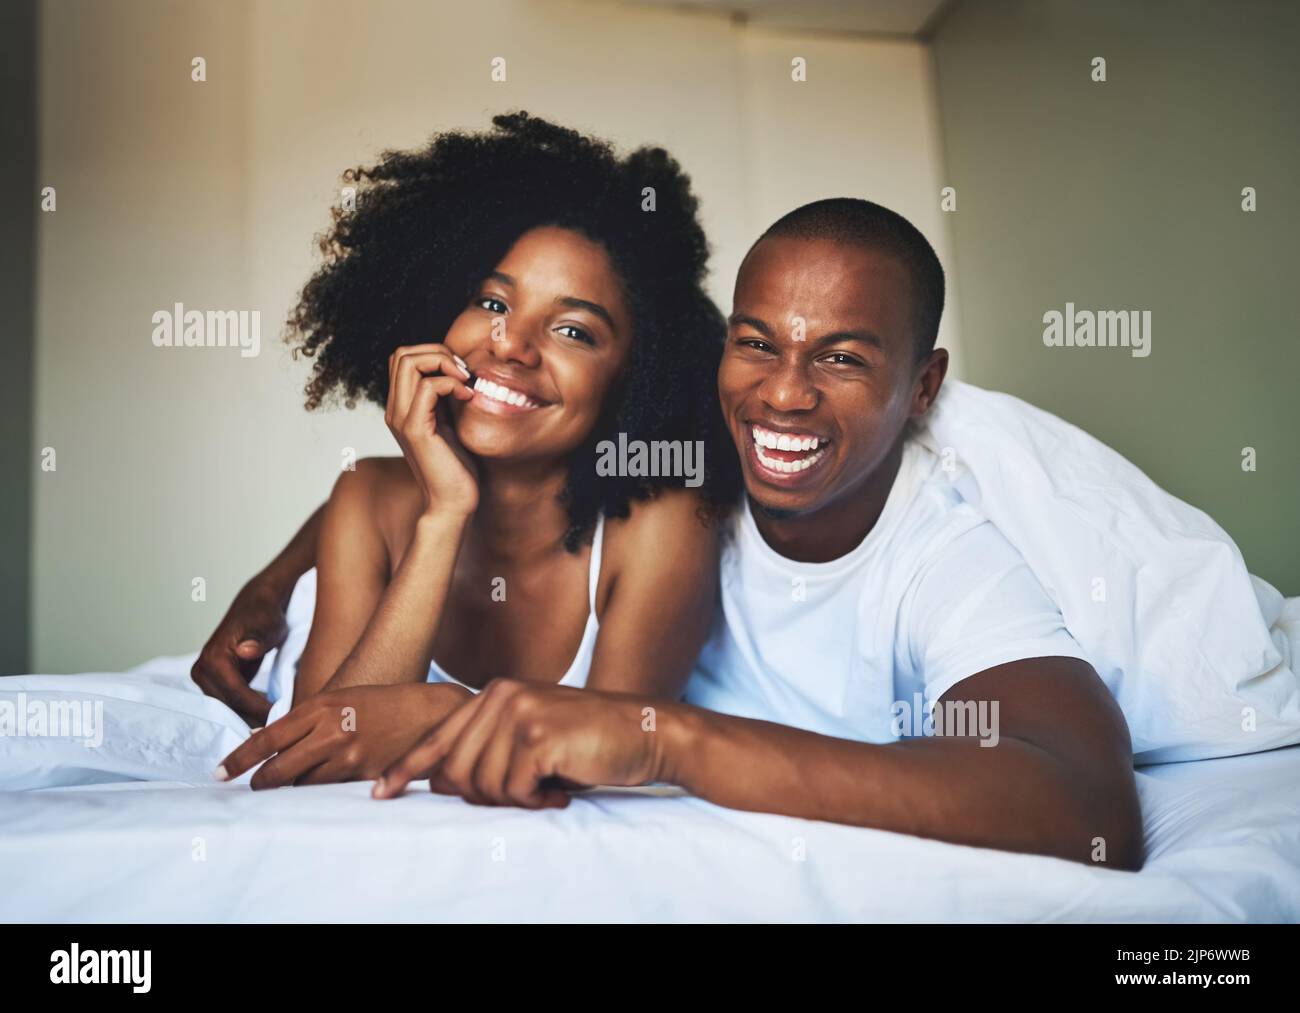 Morning time is our quality time. Portrait of a happy young couple relaxing under a duvet in their bedroom. Stock Photo